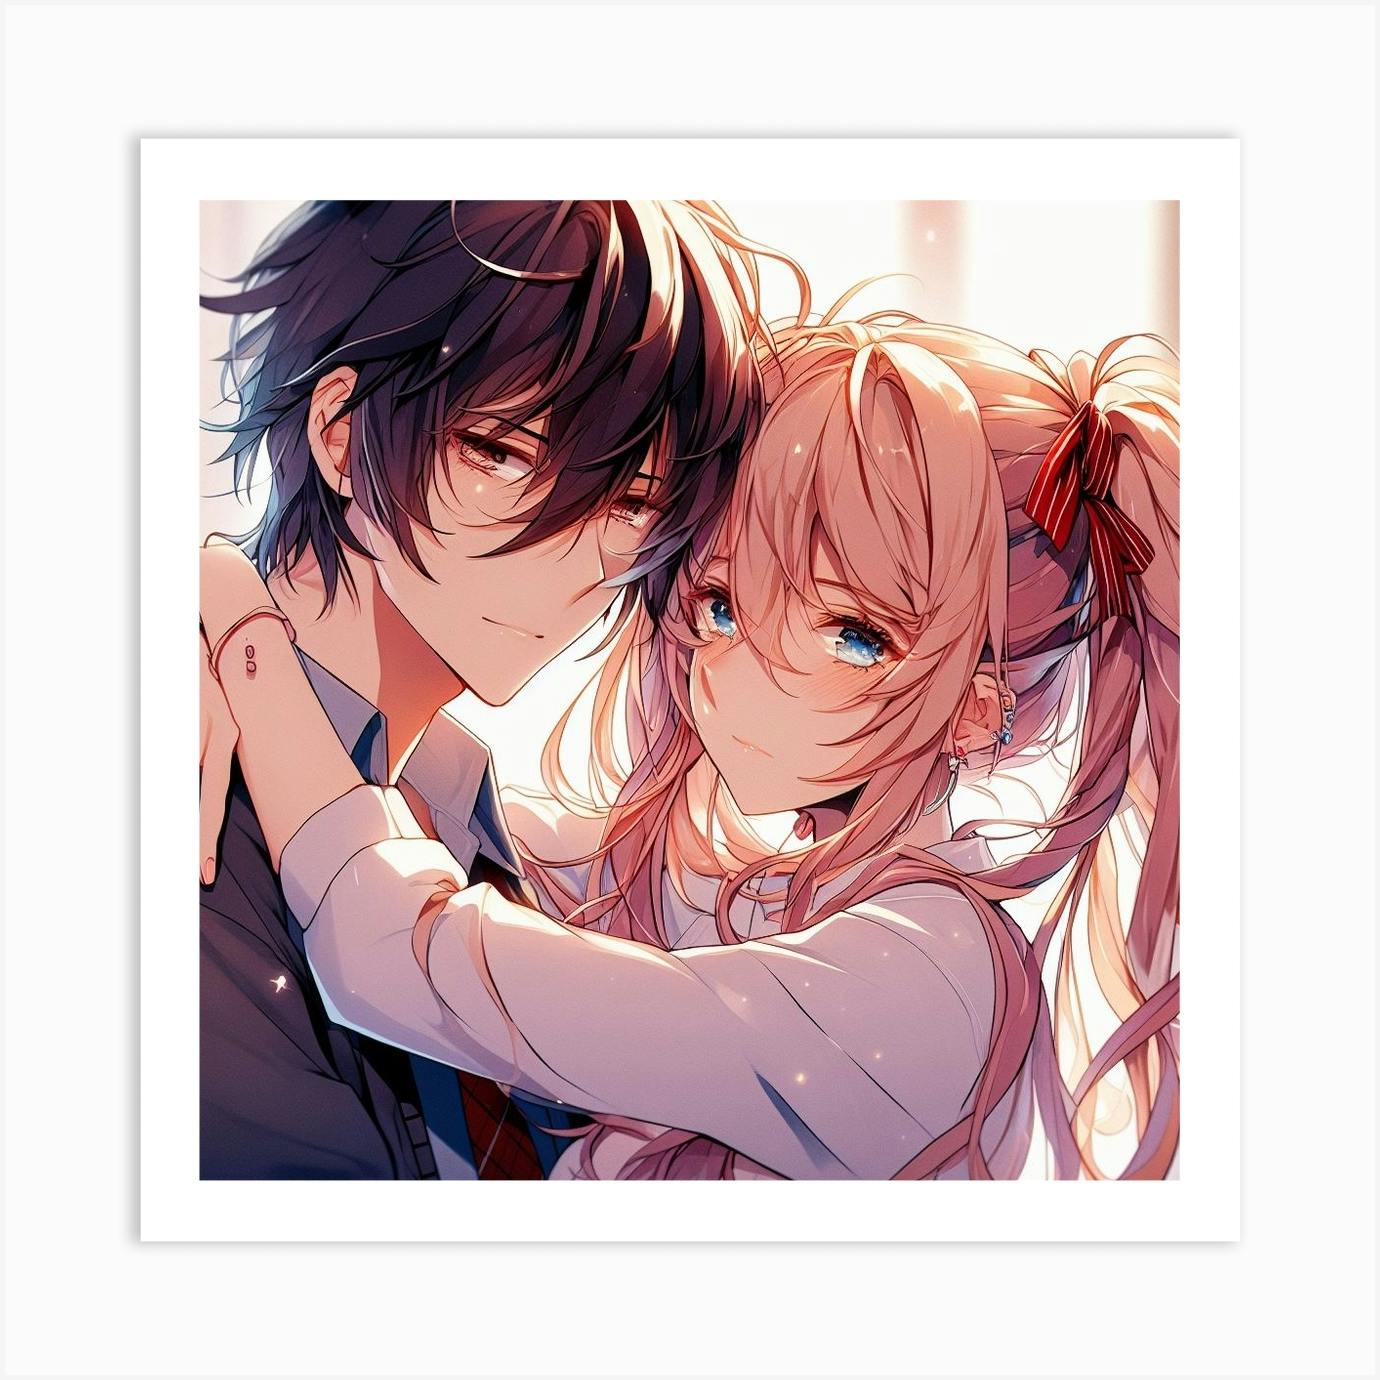 Amazon.com: COOPOY Anime Couple Hugging Poster Canvas Customized Poster  Bedroom Paintings Room Decor Posters for Wall 08x12inch(20x30cm) : לבית  ולמטבח